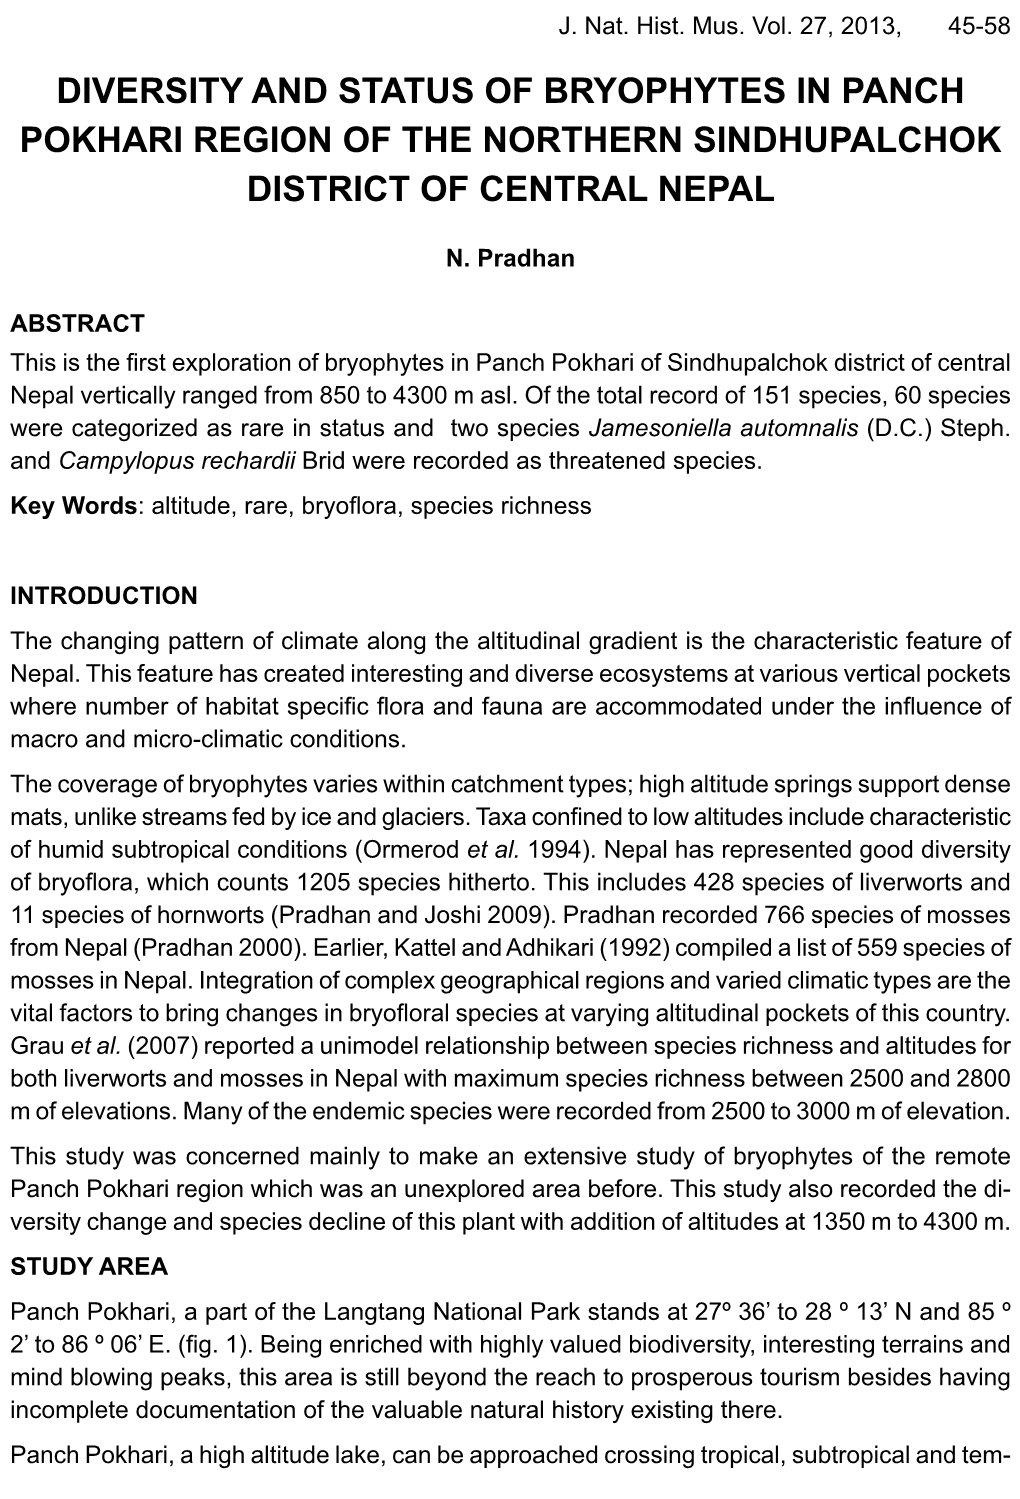 Diversity and Status of Bryophytes in Panch Pokhari Region of the Northern Sindhupalchok District of Central Nepal